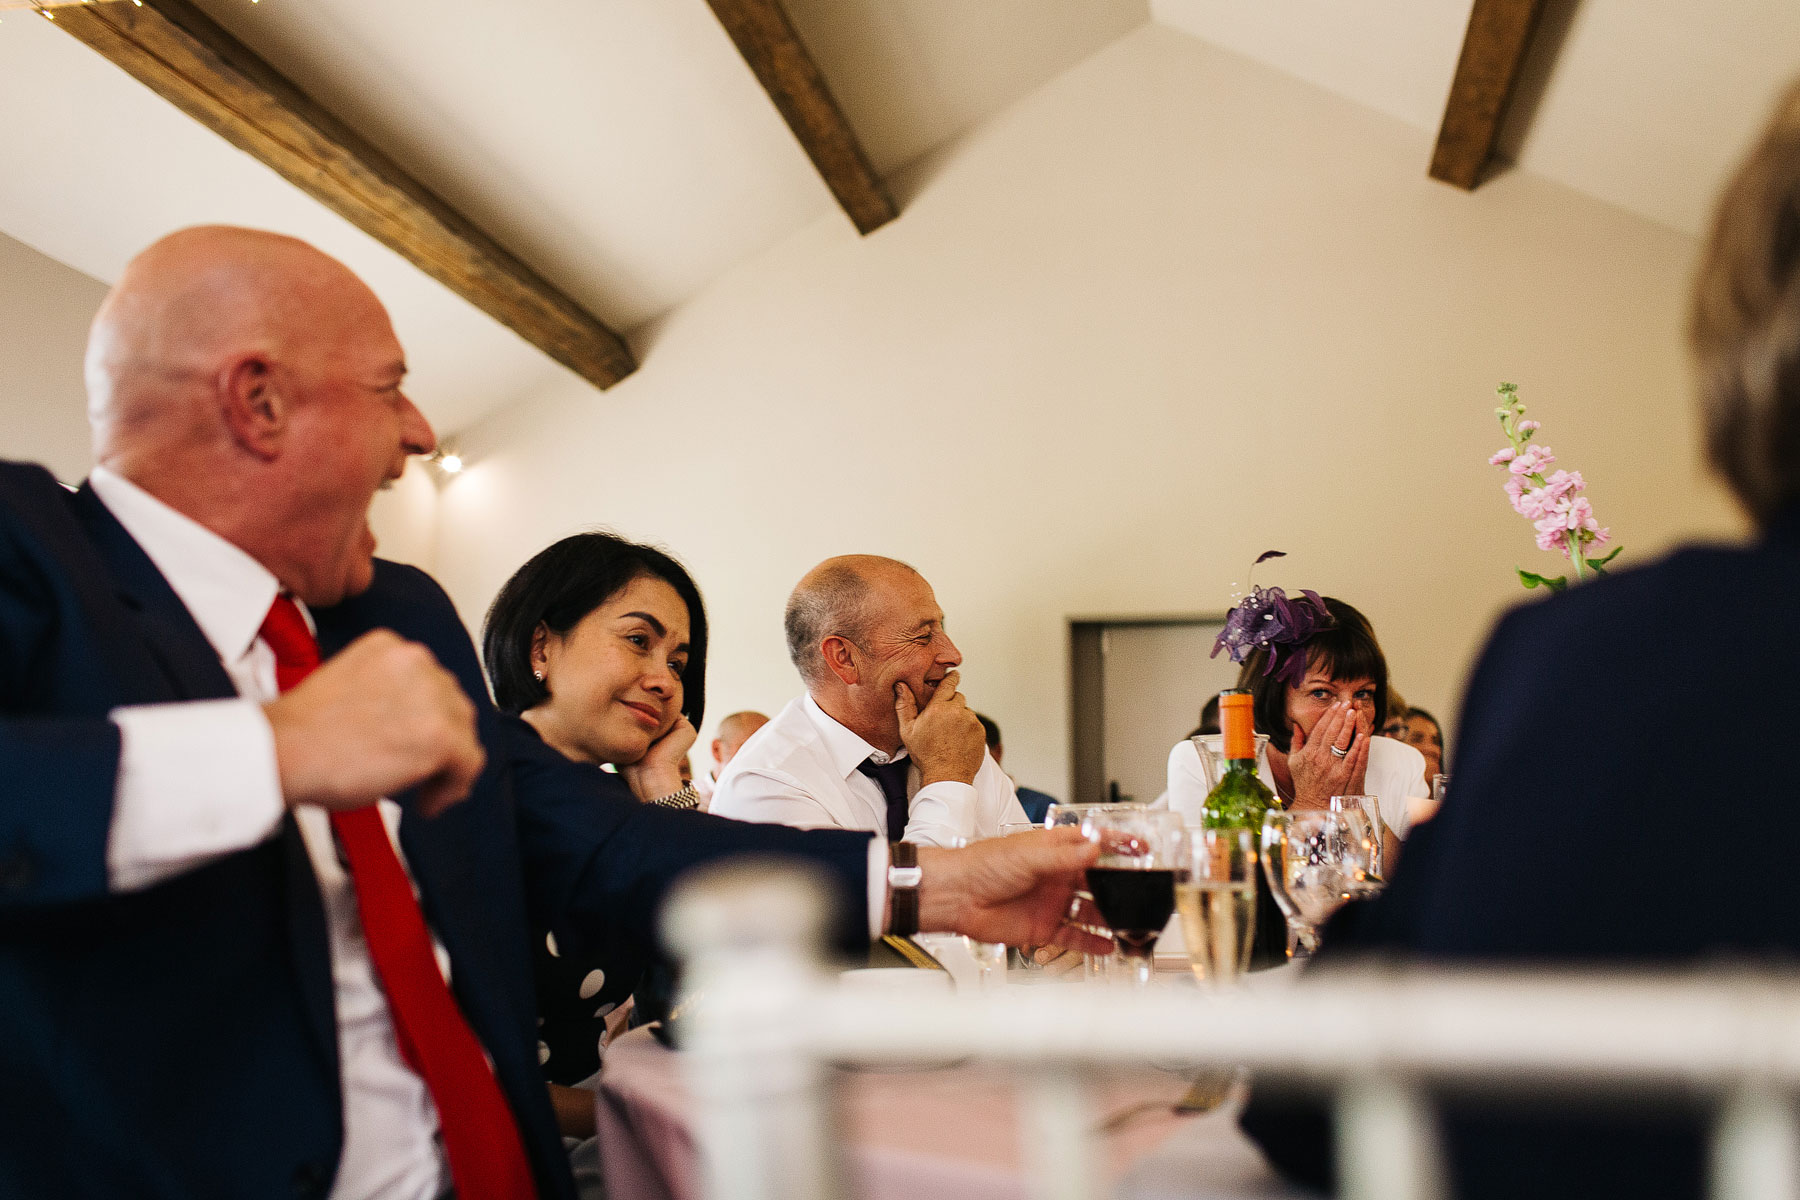 speeches at a wedding in yorkshire